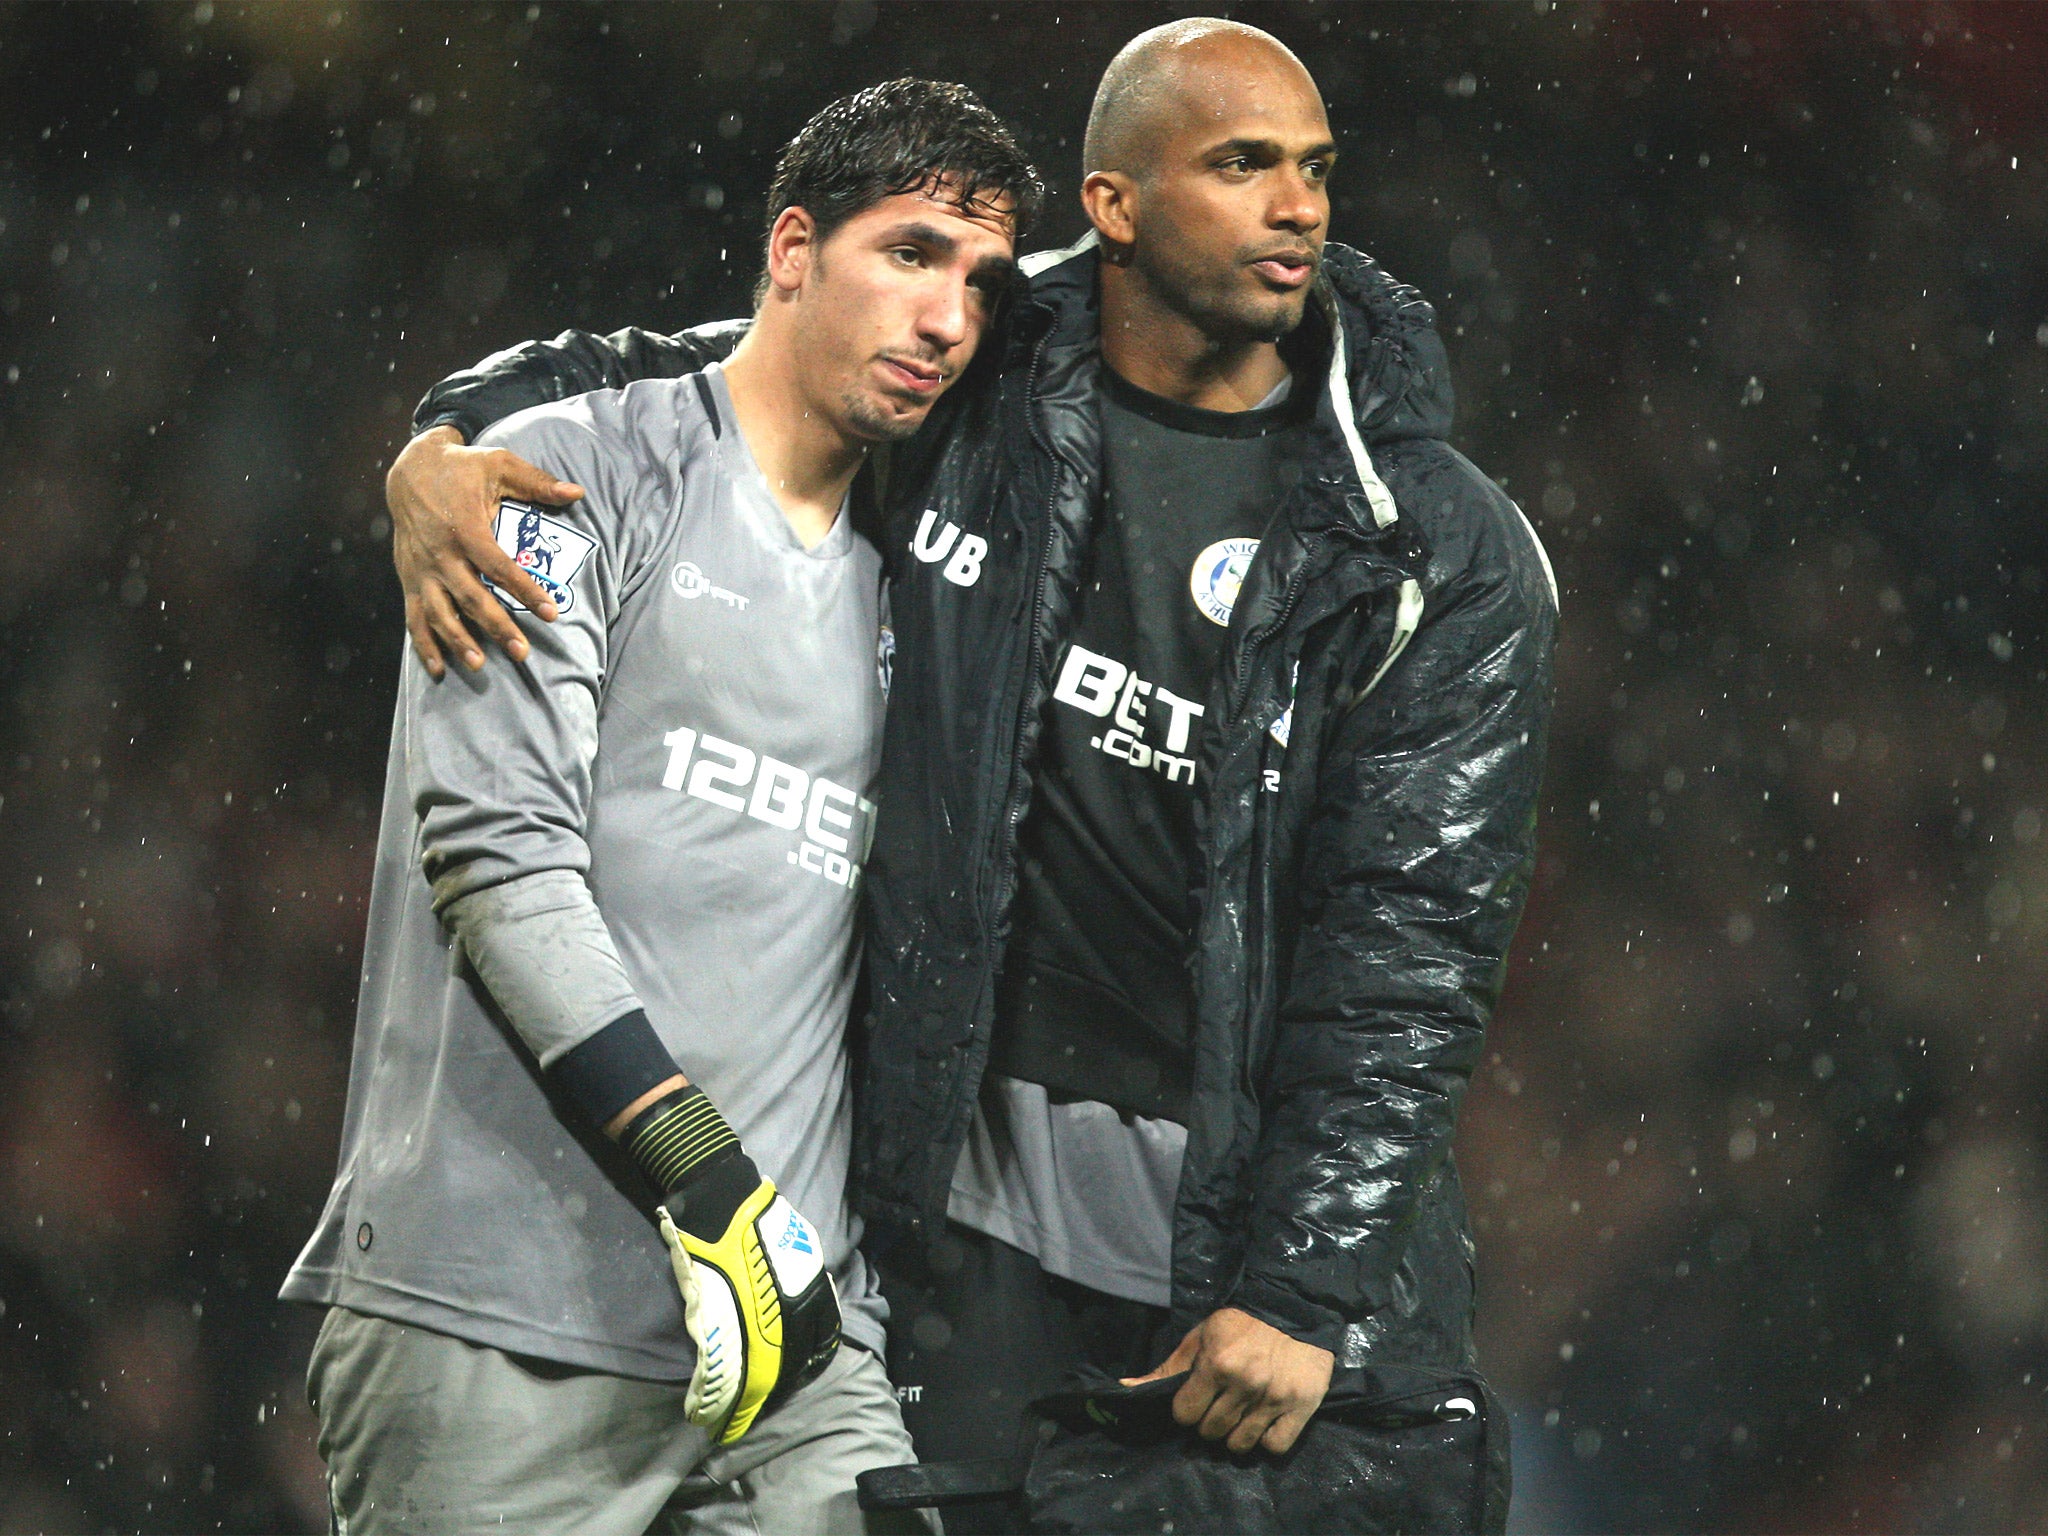 Wigan goalkeepers Joel Robles (left) and Ali Al-Habsi are dejected after their team’s relegation